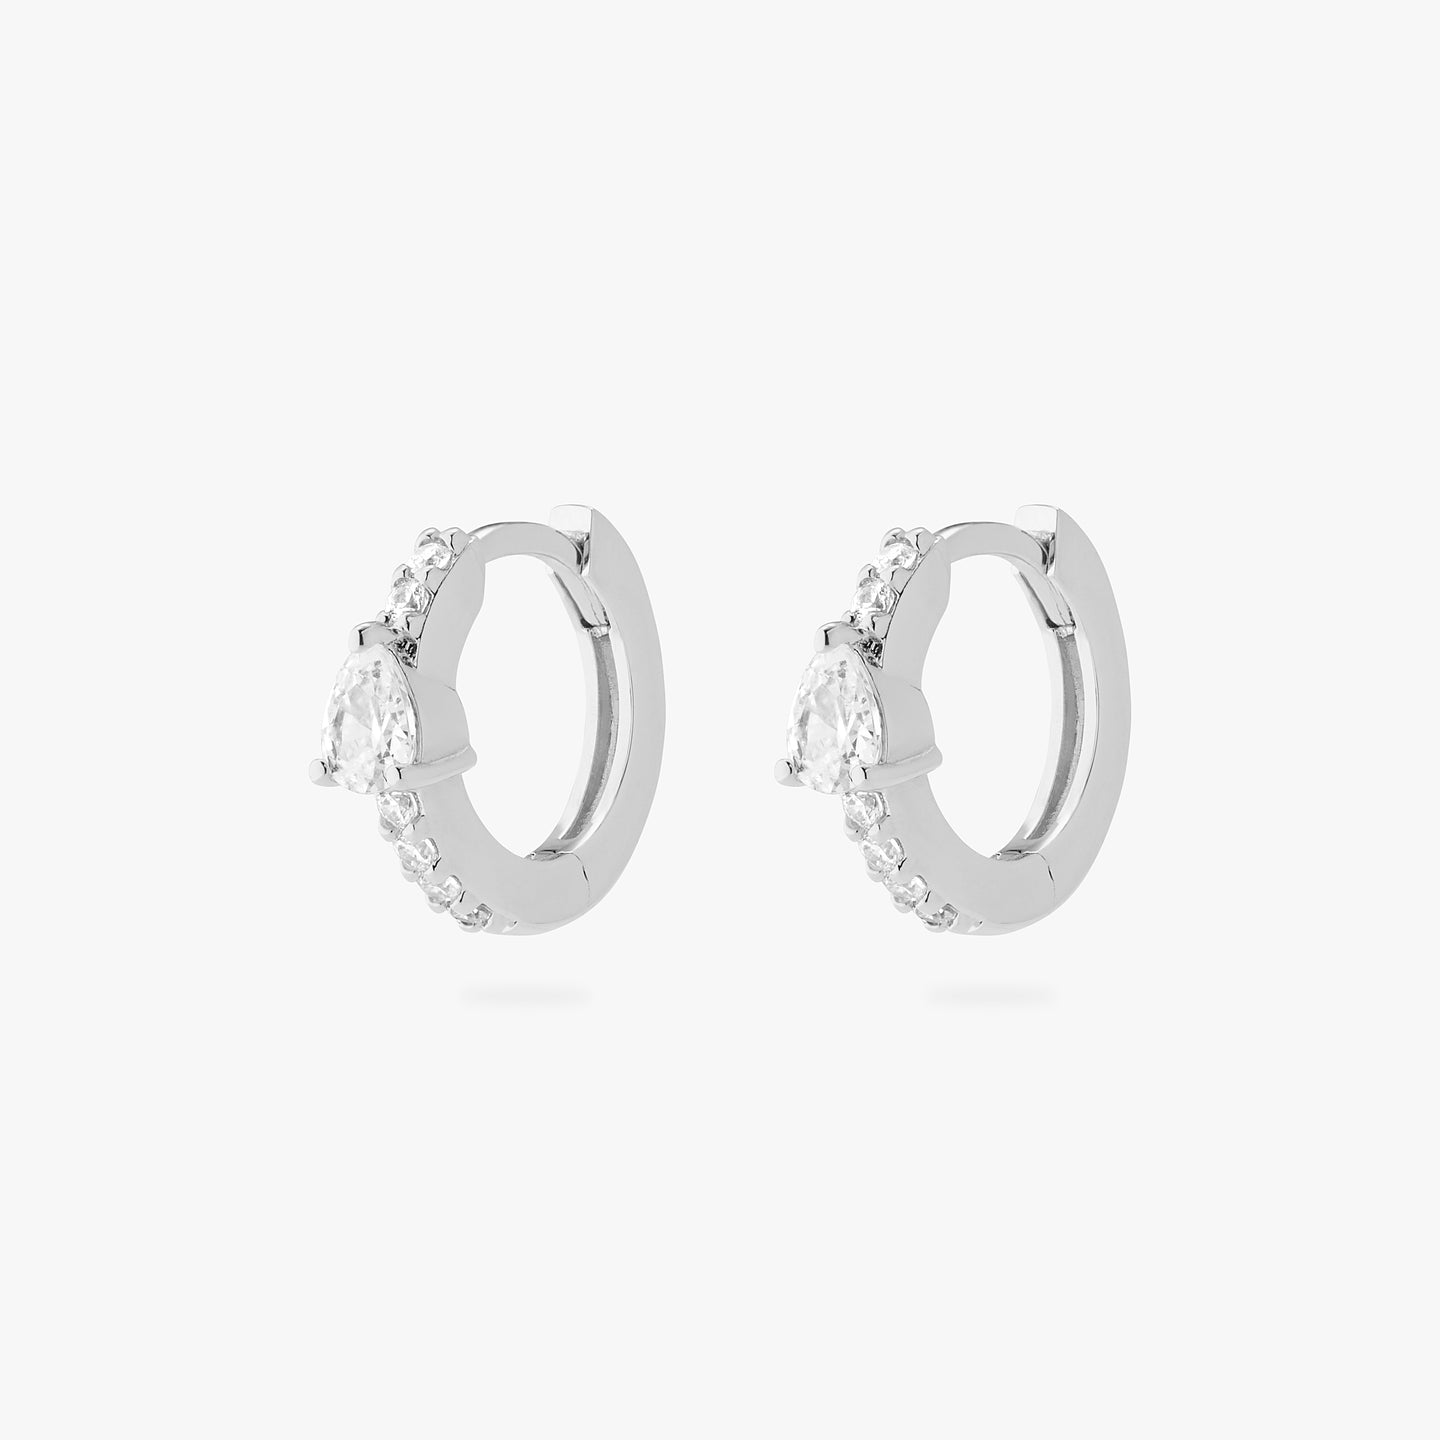 An image of a pair of silver/clear mini pave huggies with a clear pear shaped CZ accent stone. [pair] color:null|silver/clear